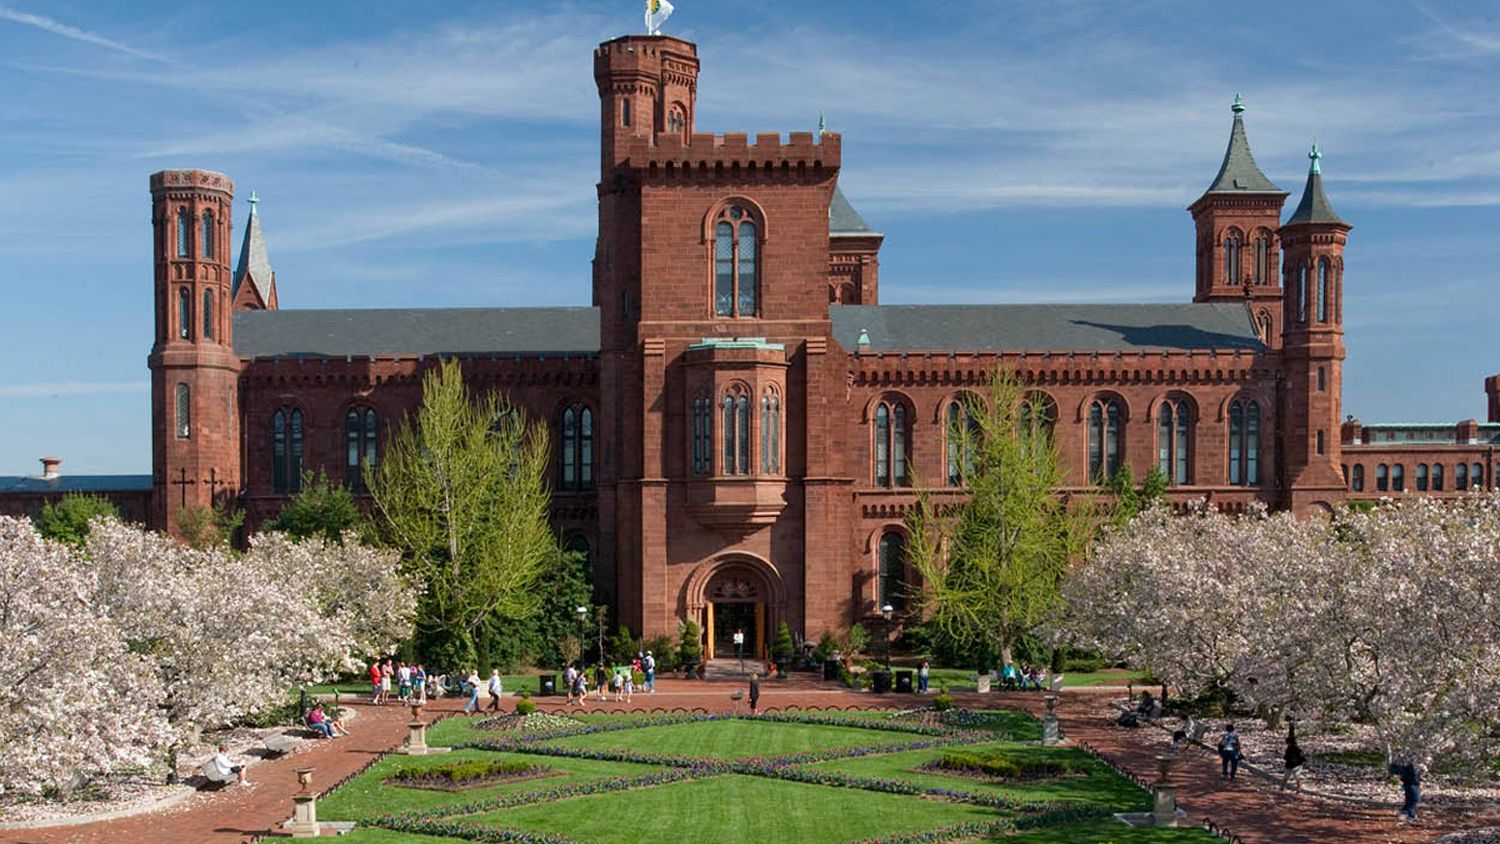 Smithsonian Institution Fellowship Program for Graduate and Postgraduate Researchers